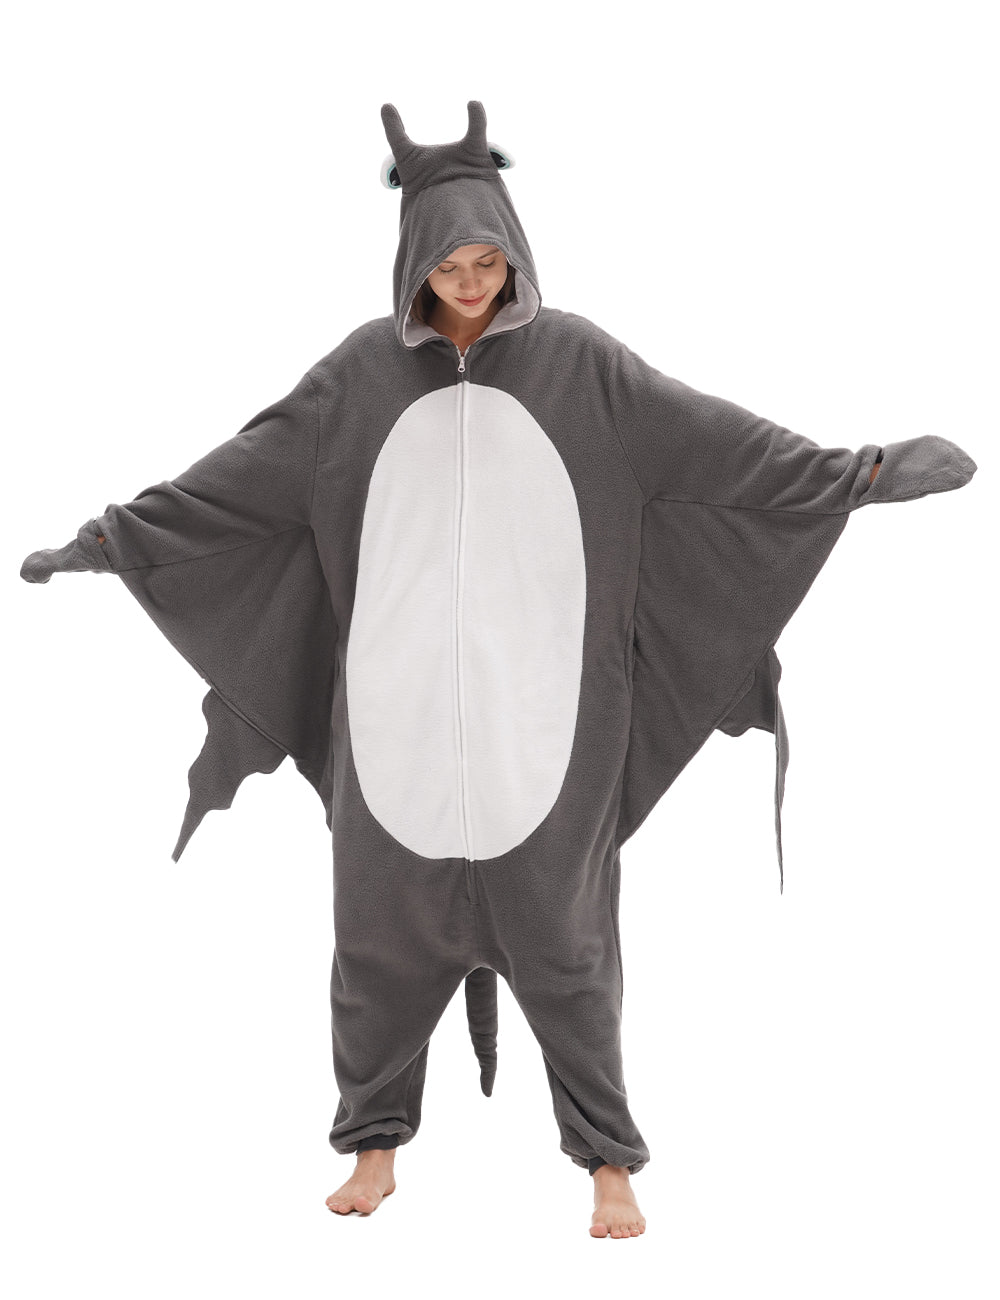 Dive into Comfort: The Manta Ray Onesie Trend Takes Flight!